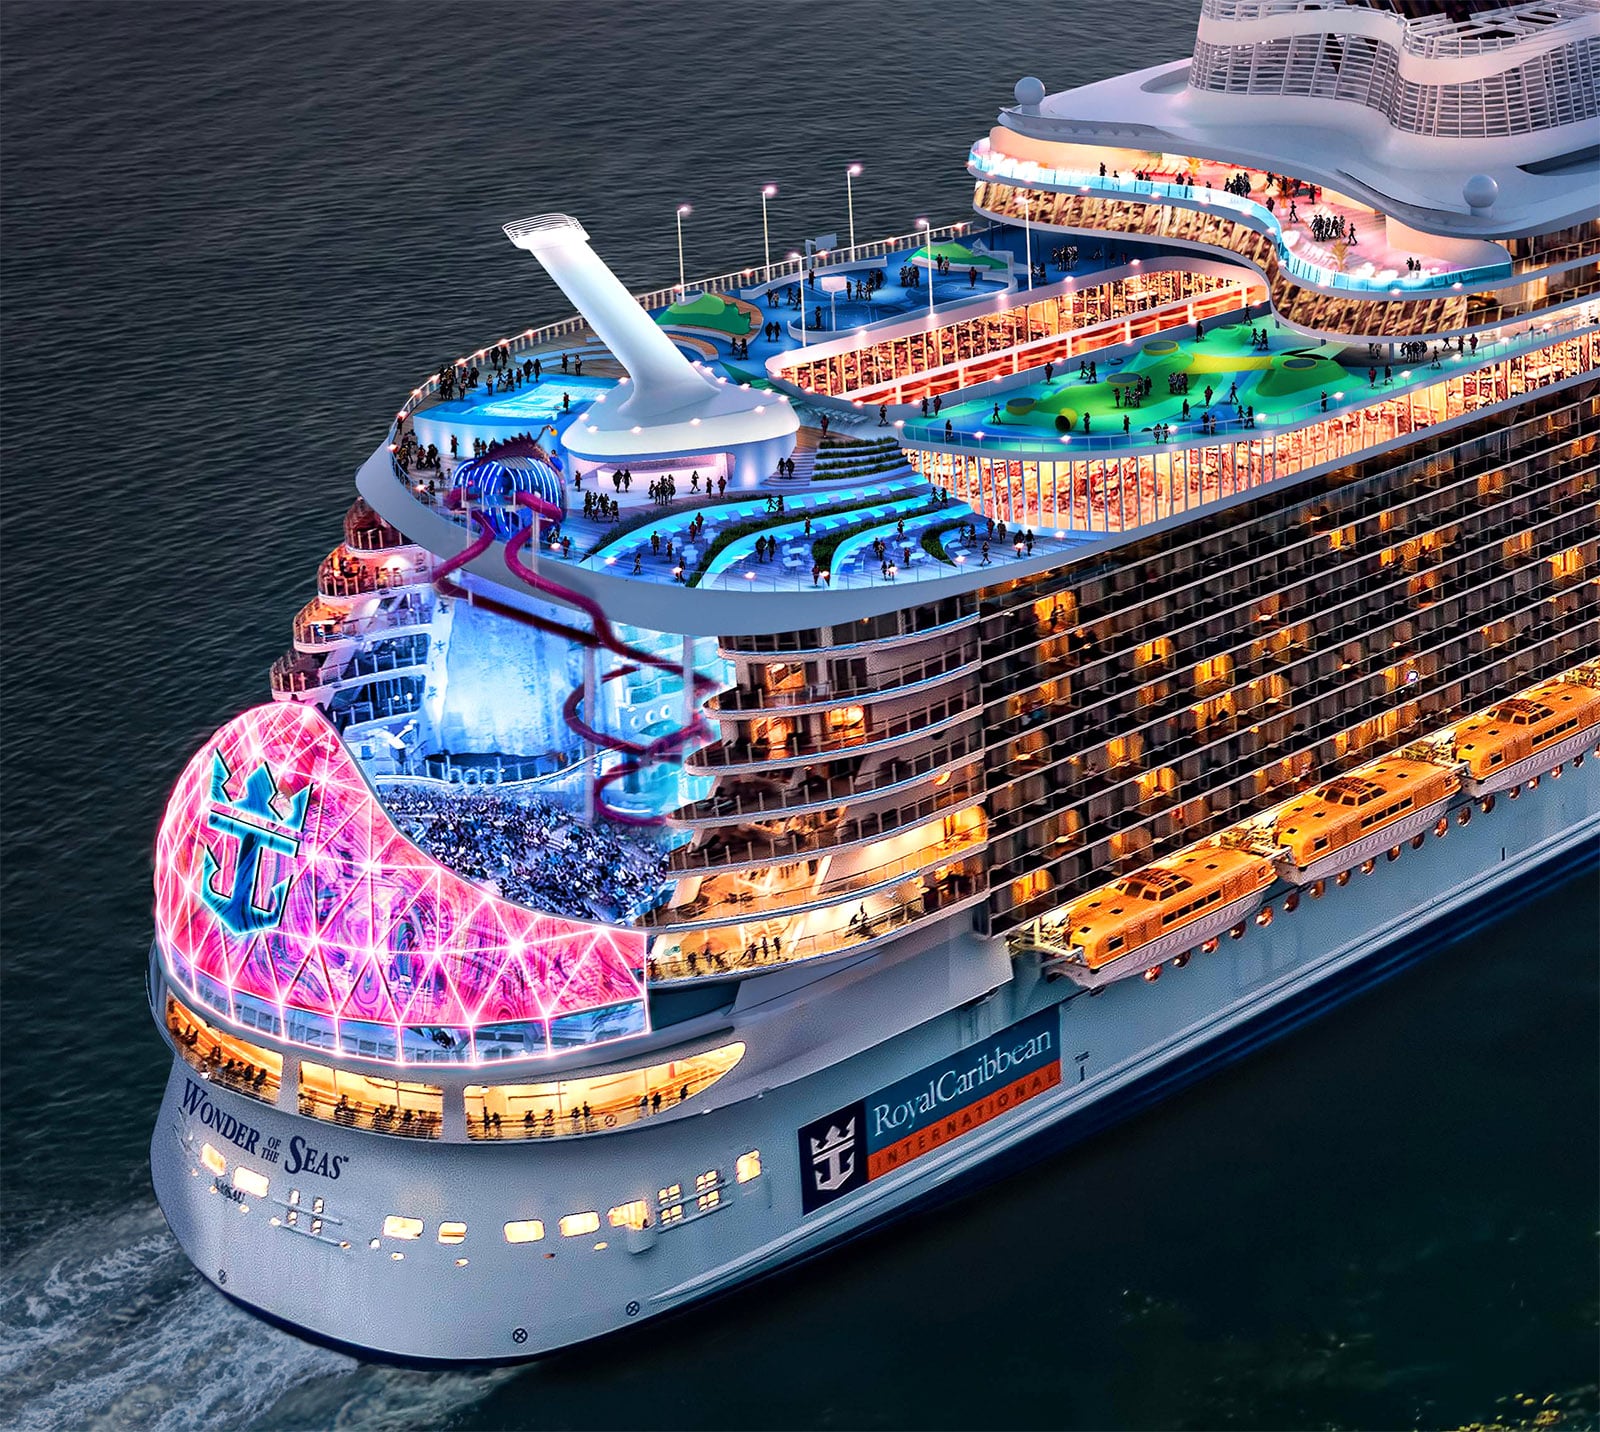 Single FlowRider and other changes on Wonder of the Seas - Royal Caribbean Discussion - Royal Caribbean Blog